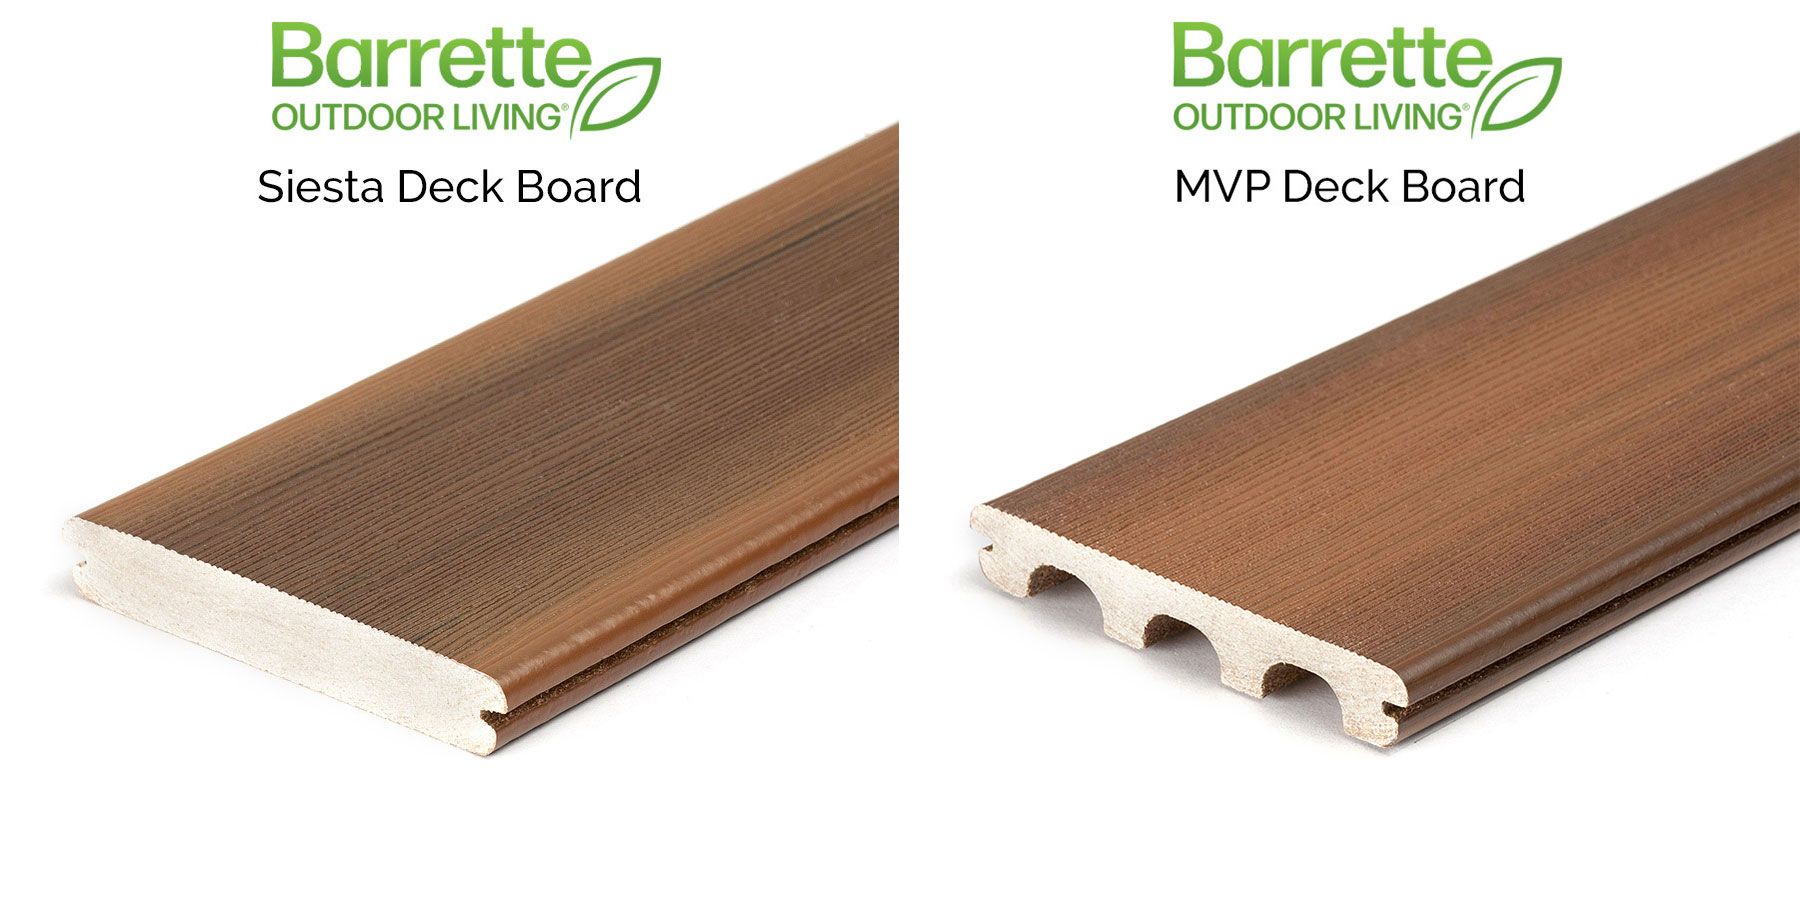 Composite deck boards are offered in either solid board designs or scalloped bottom board designs for easy installation